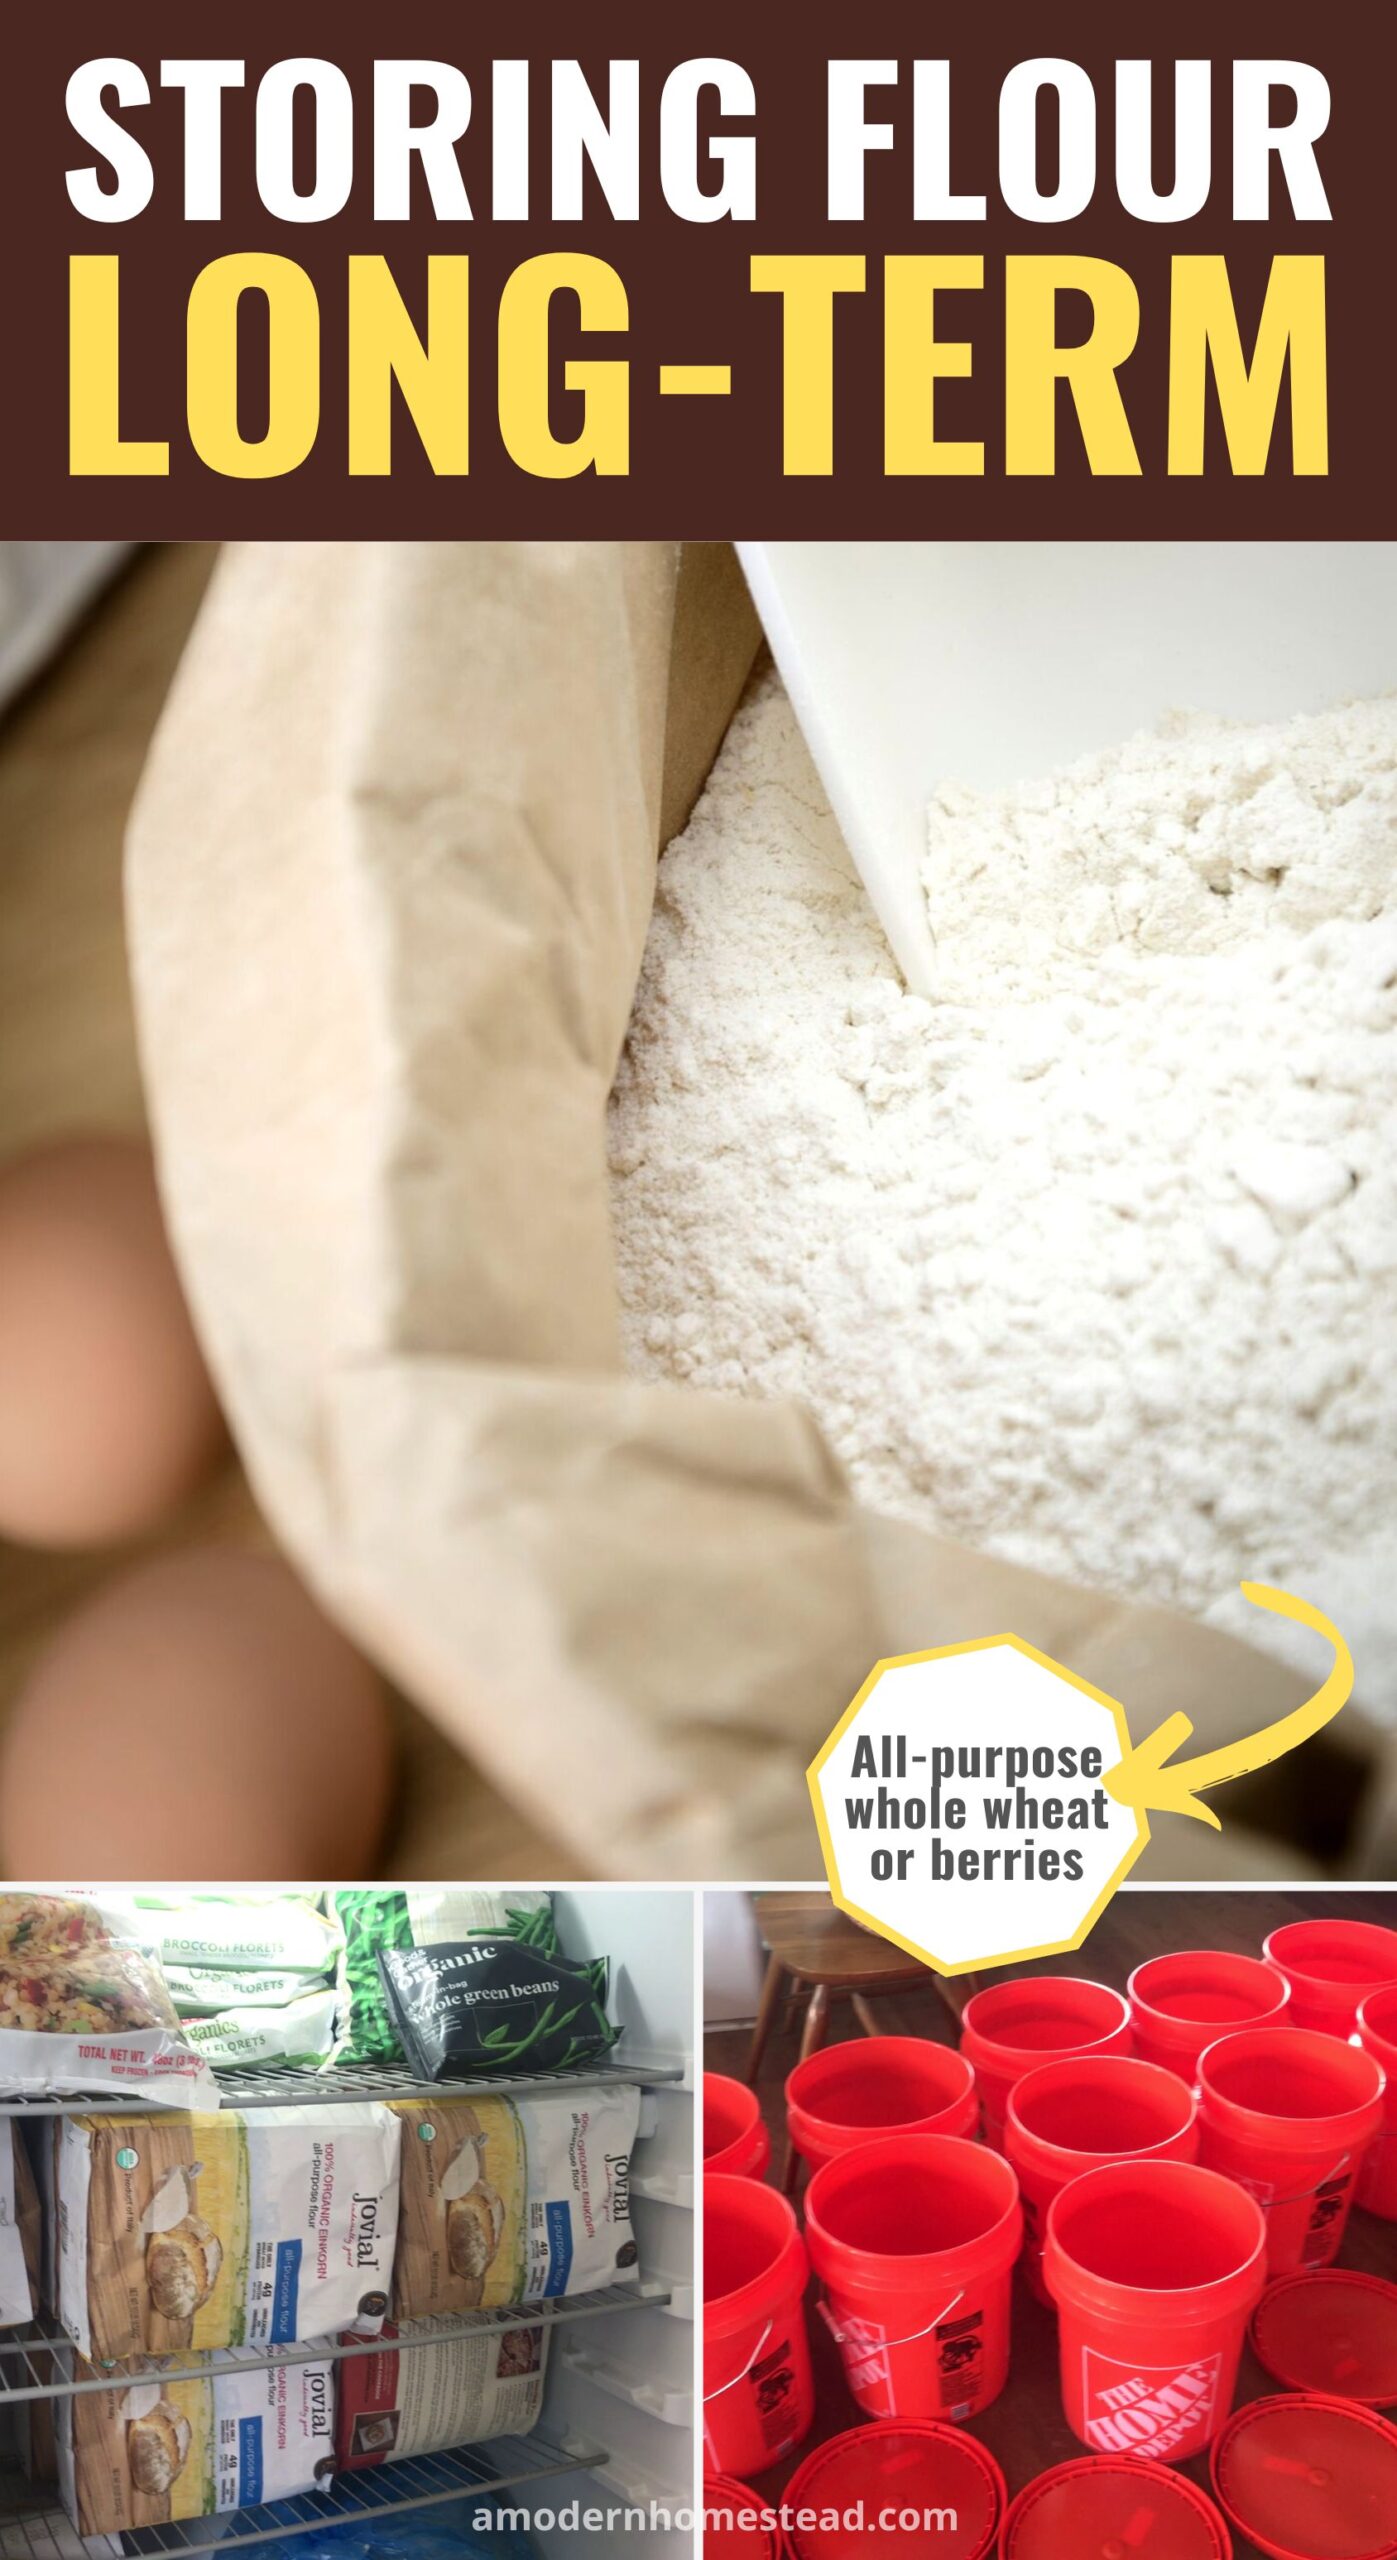 How to Properly Store Flour